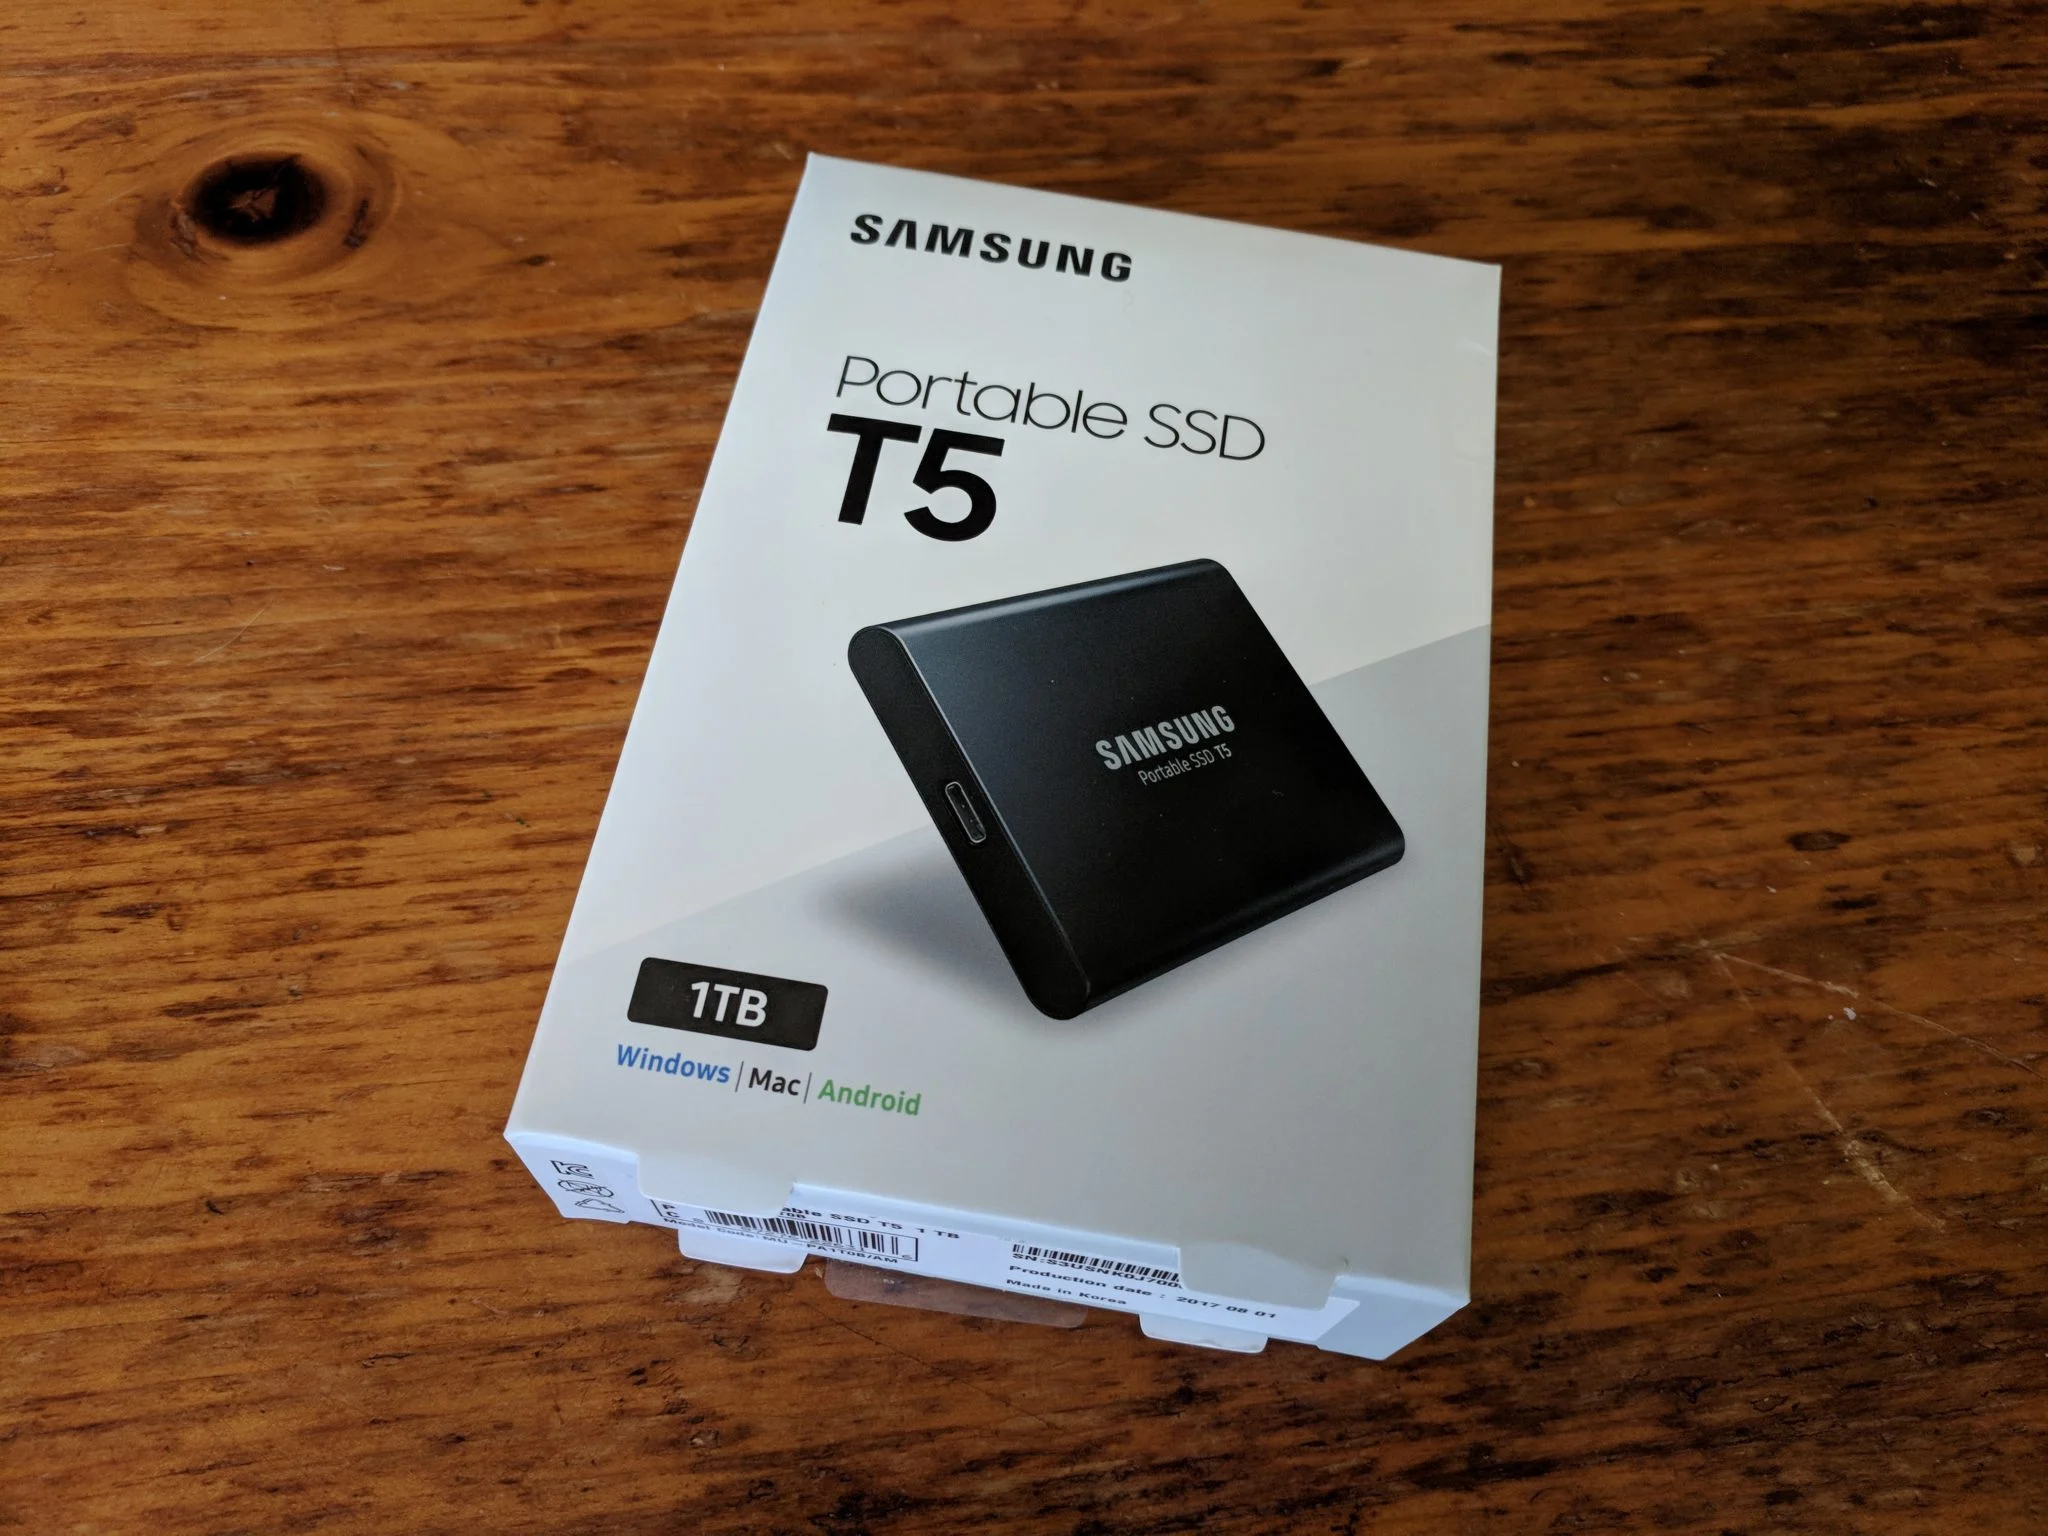 5-amazing-portable-ssd-t5-1tb-for-2023